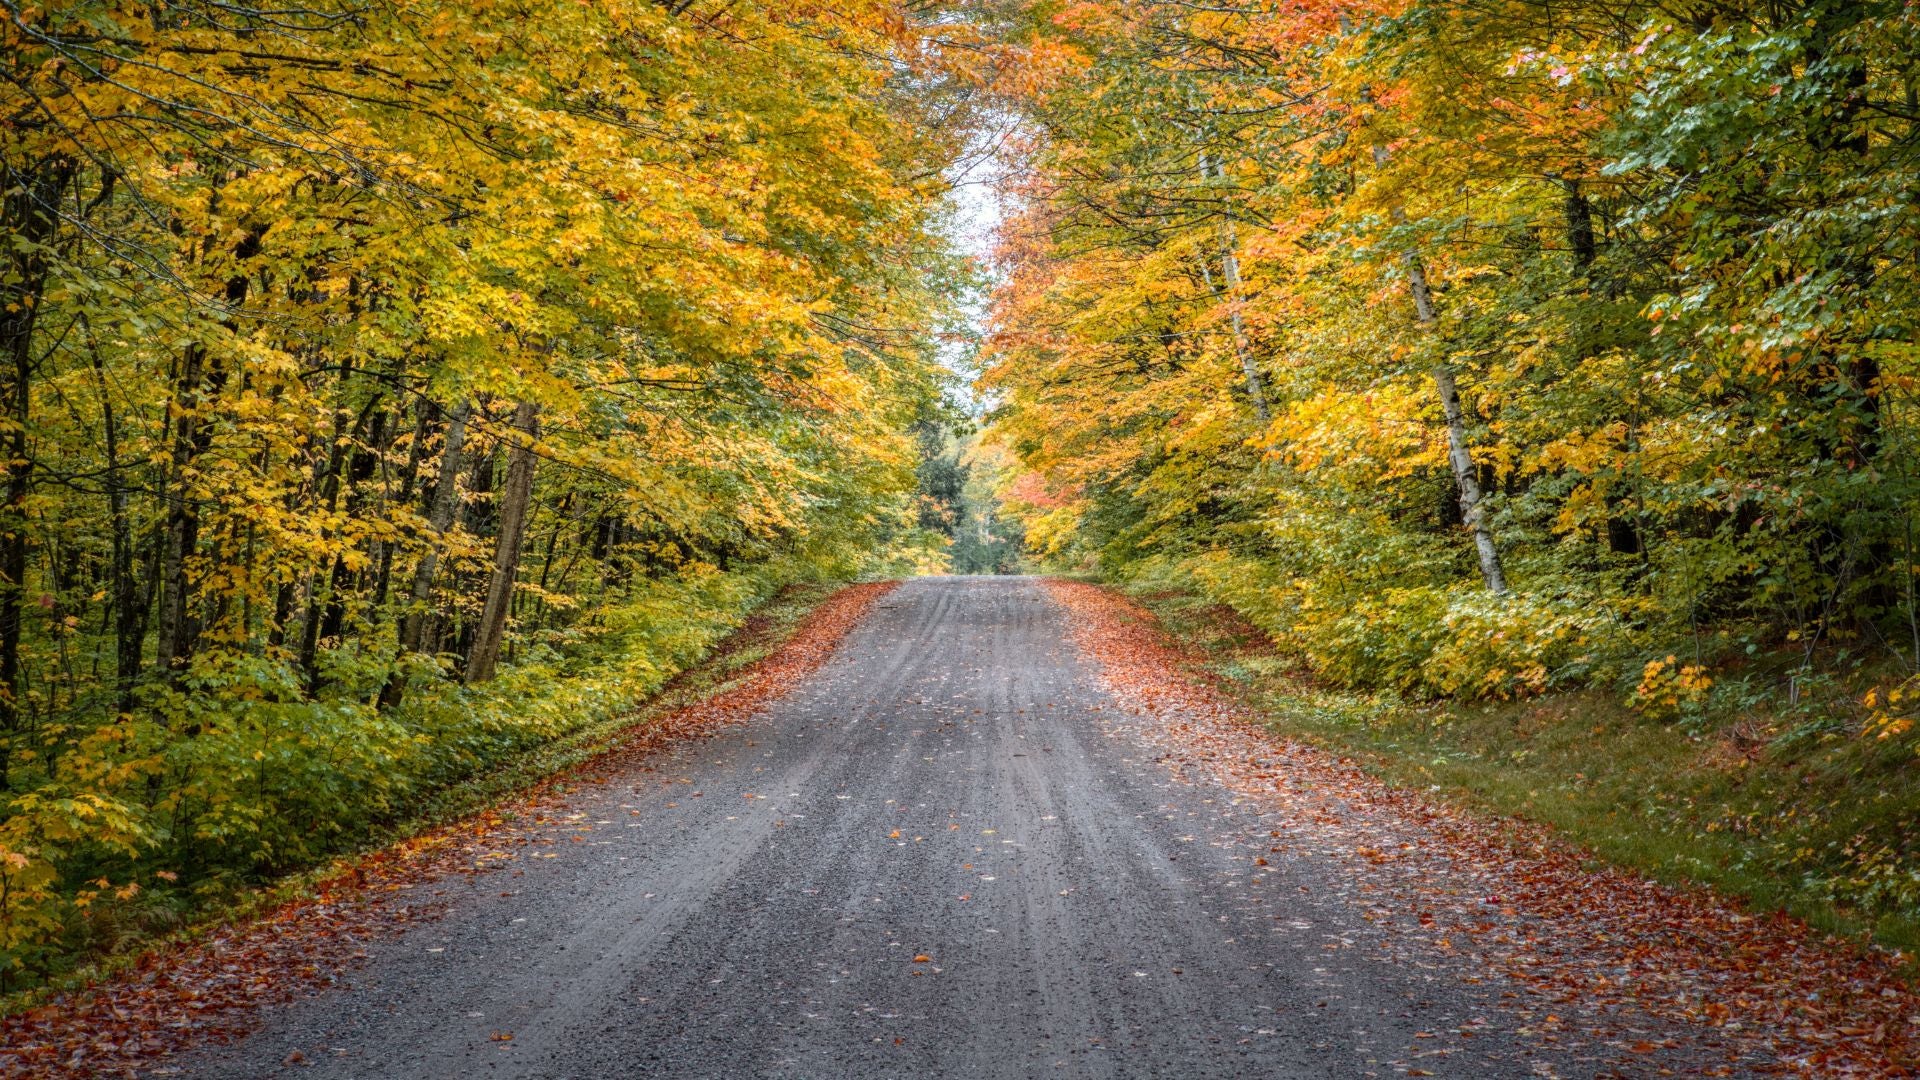 Autumn road in Merril, Wisconsin. - History By Mail